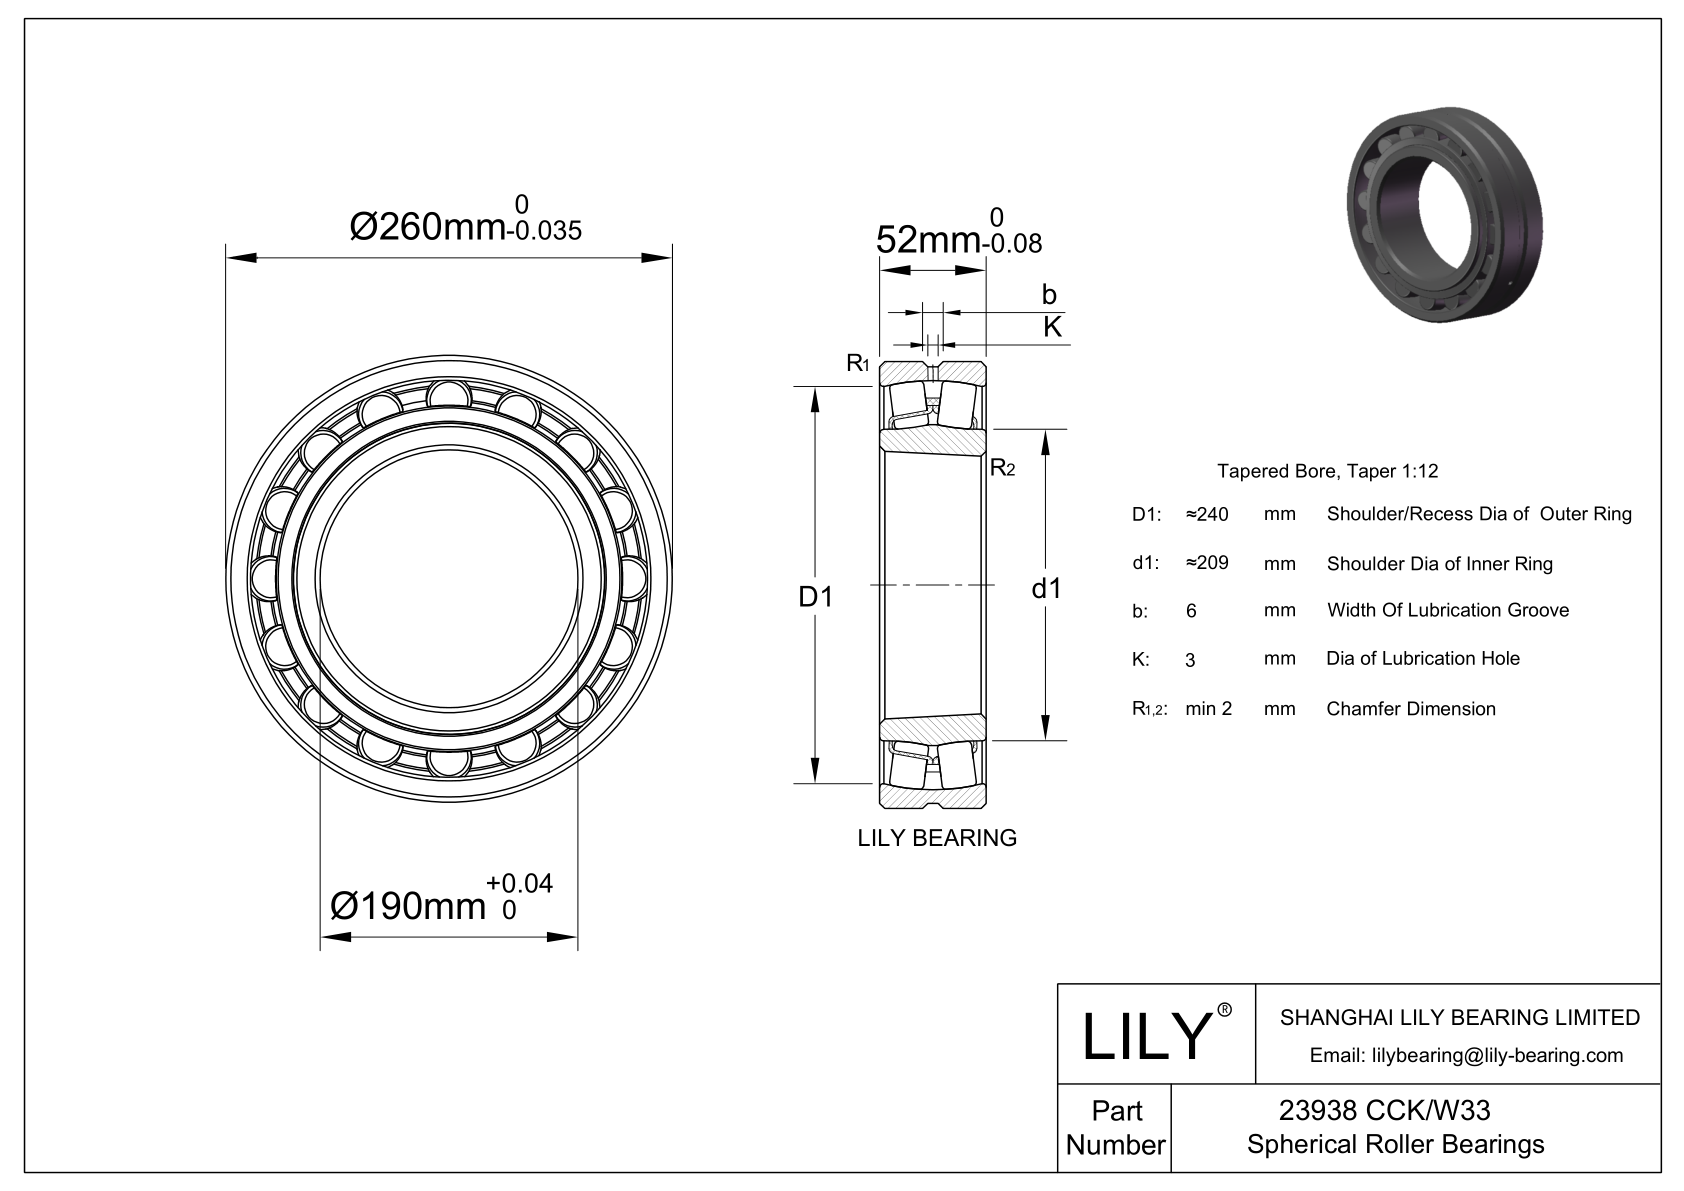 23938 CCK/W33 Double Row Spherical Roller Bearing cad drawing